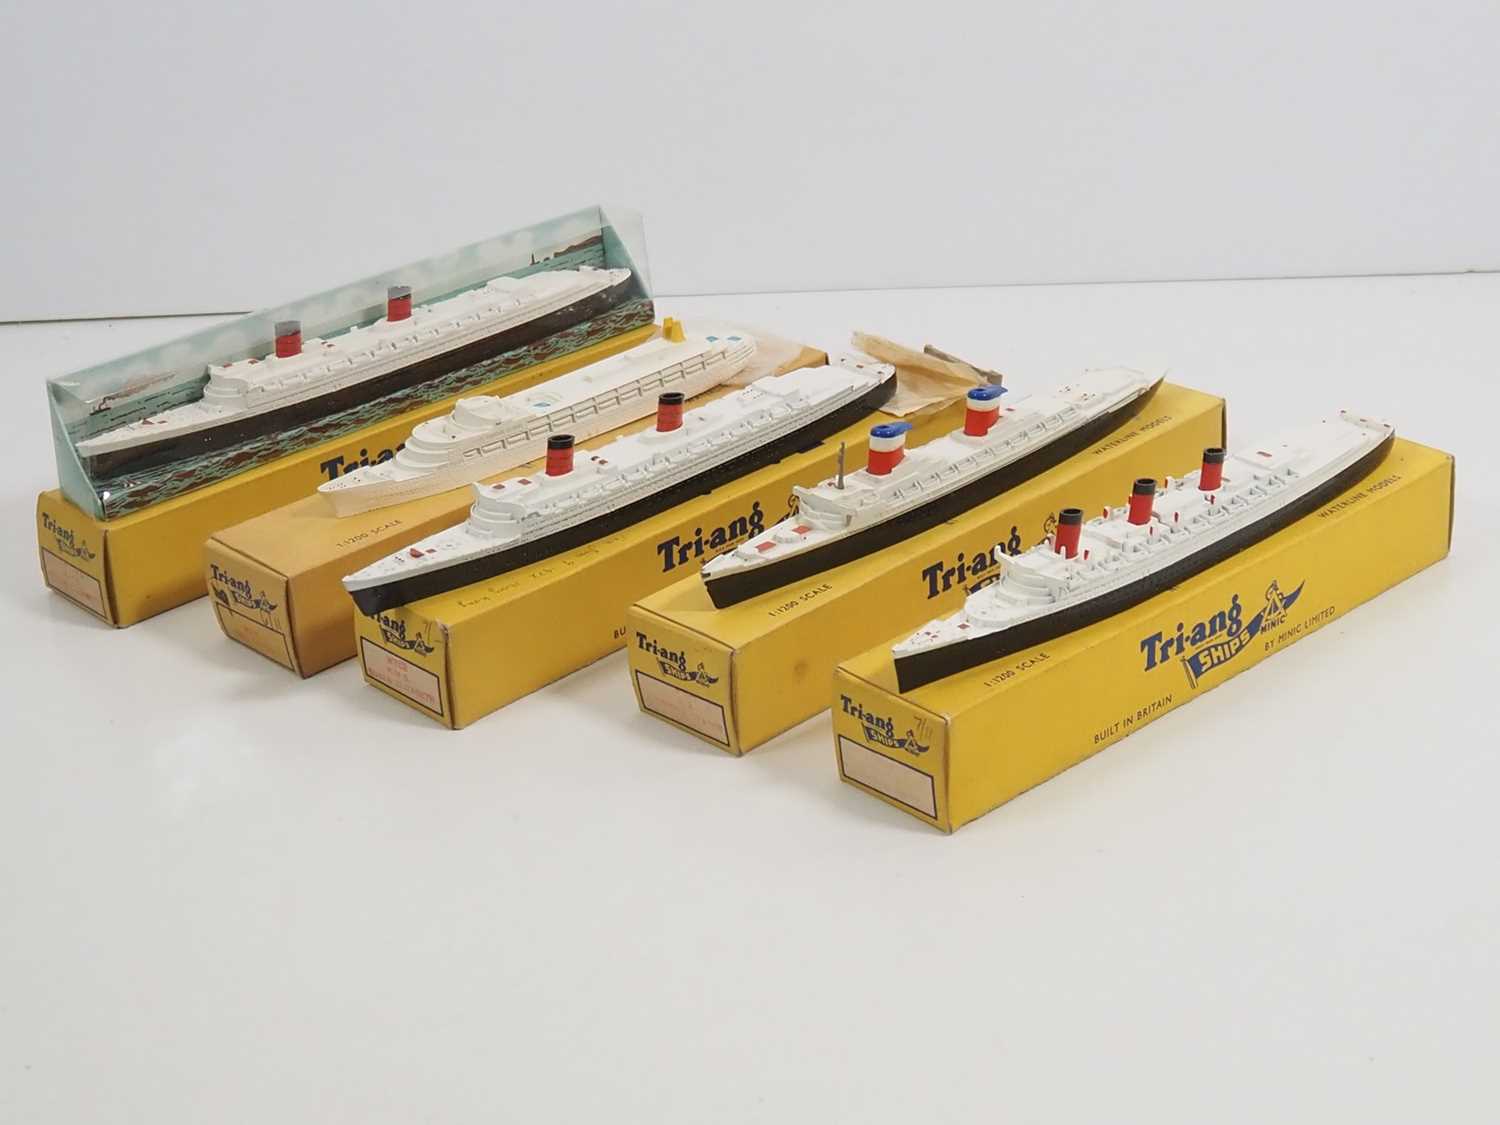 A group of vintage TRI-ANG MINIC ocean liners comprising 2x M702 RMS Queen Elizabeth (in different